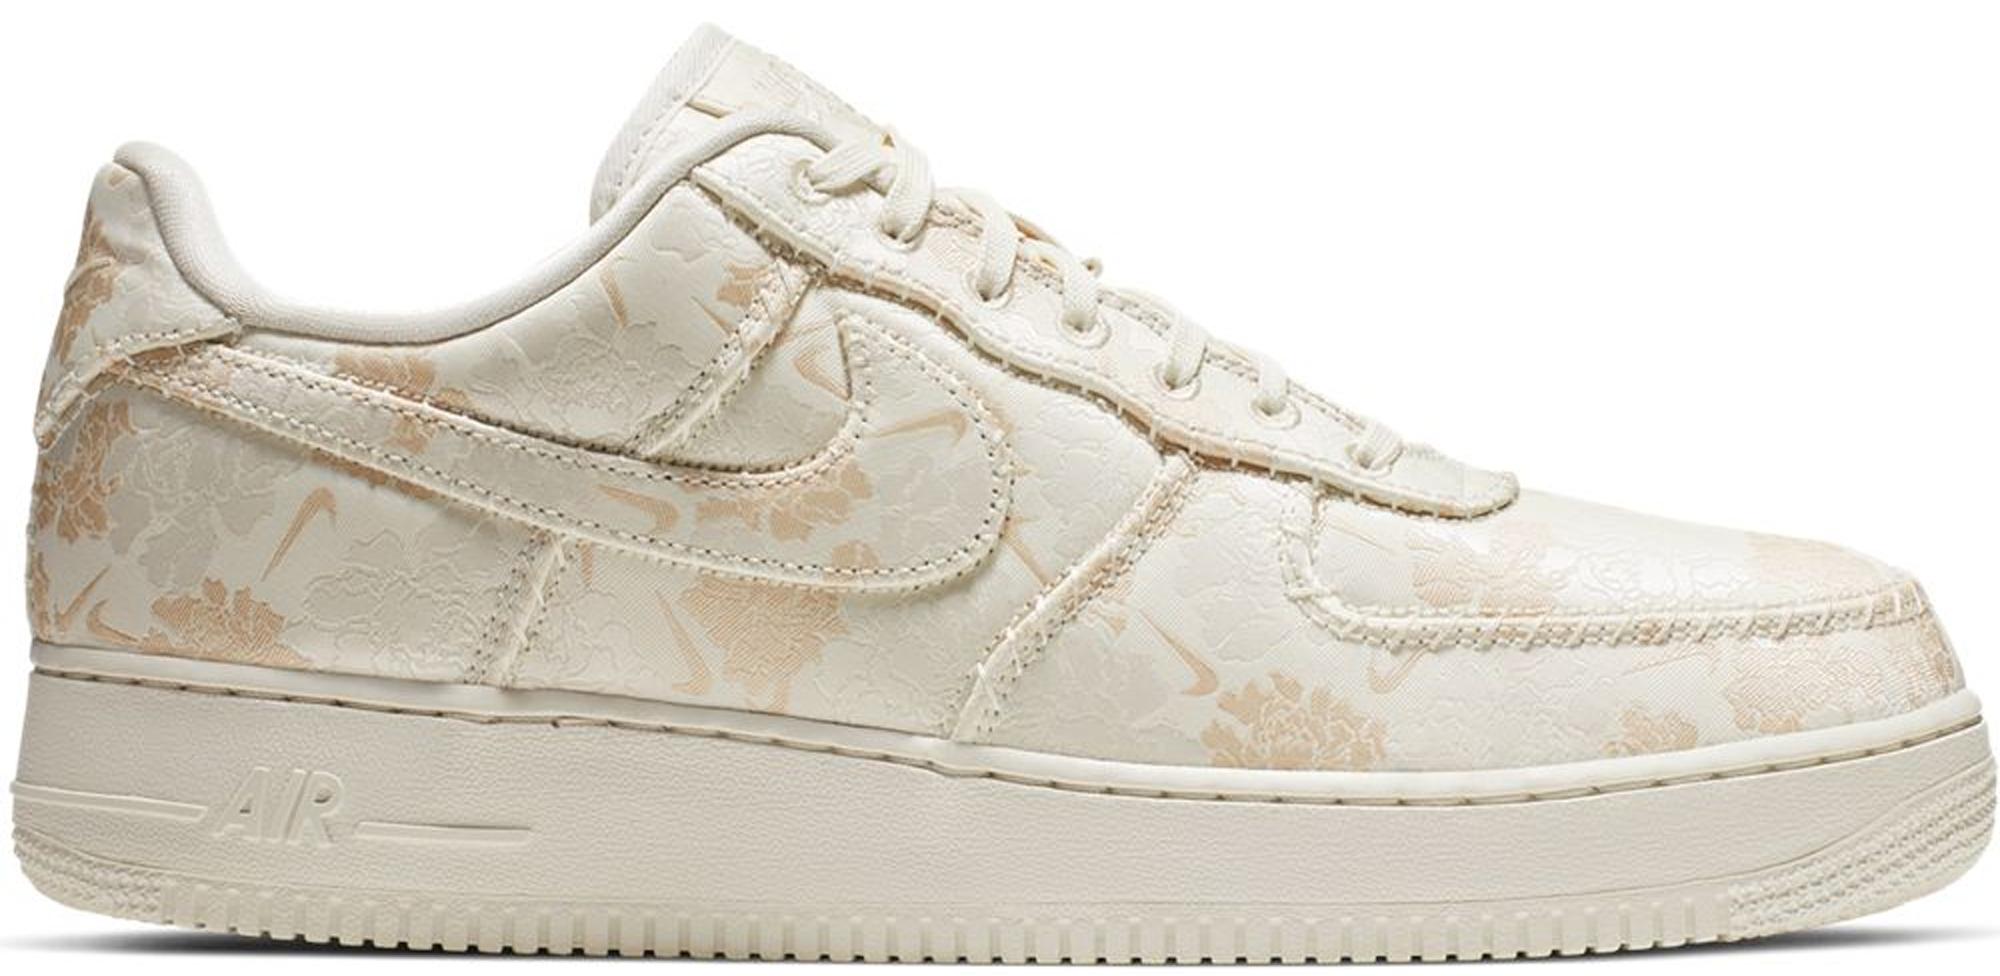 Nike Air Force 1 Low Satin Floral Pale 